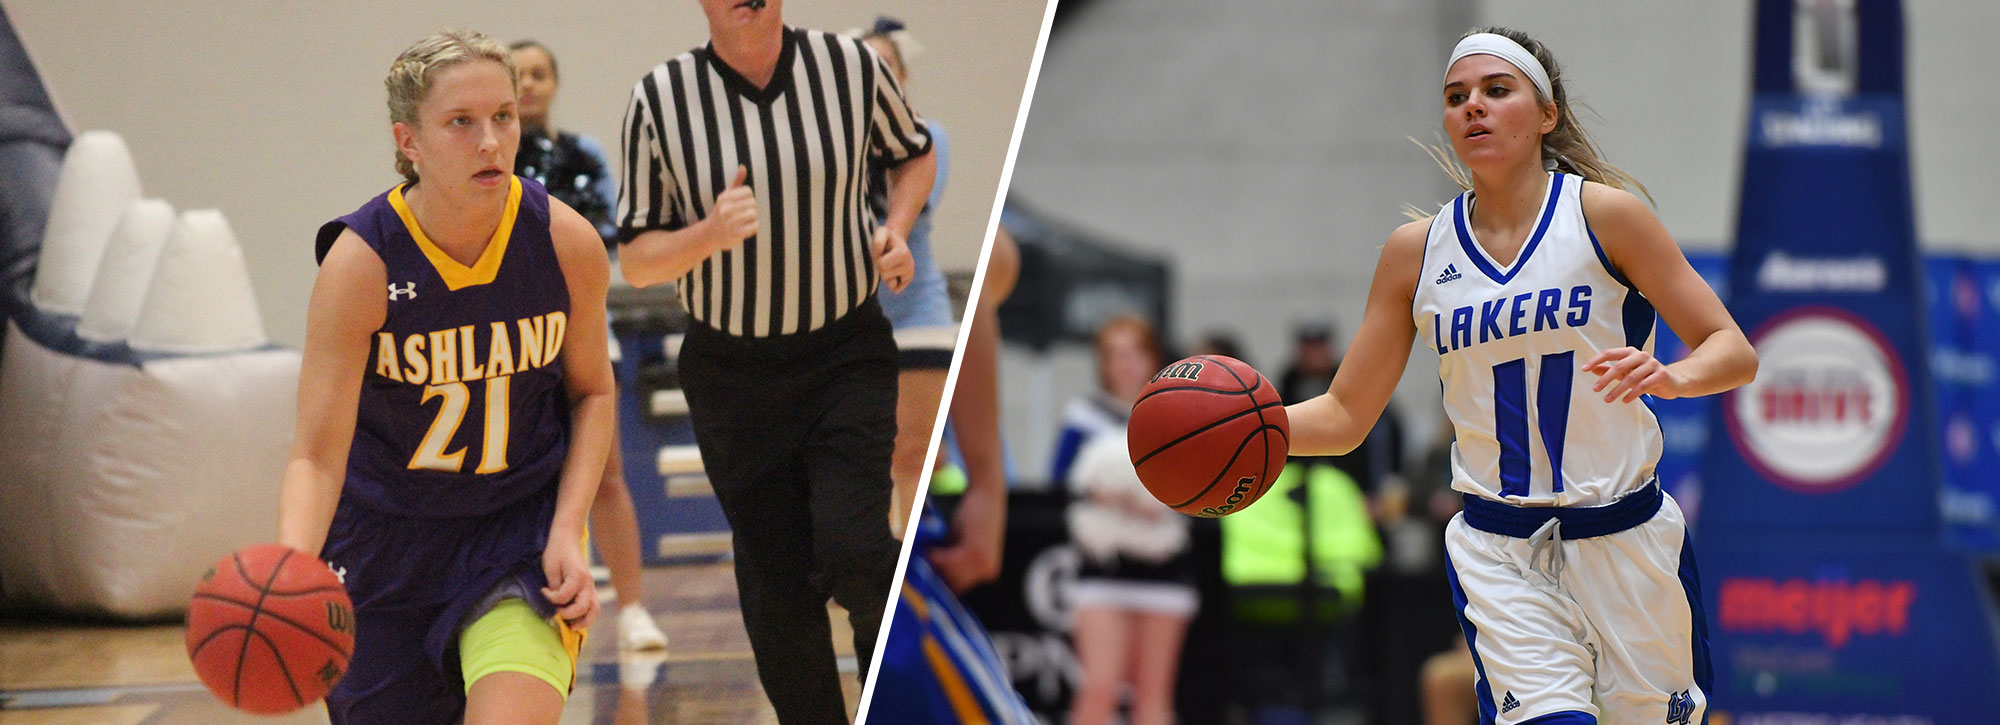 Ashland's Johnson, Grand Valley State's Koenig Collect GLIAC Hoops Weekly Honors